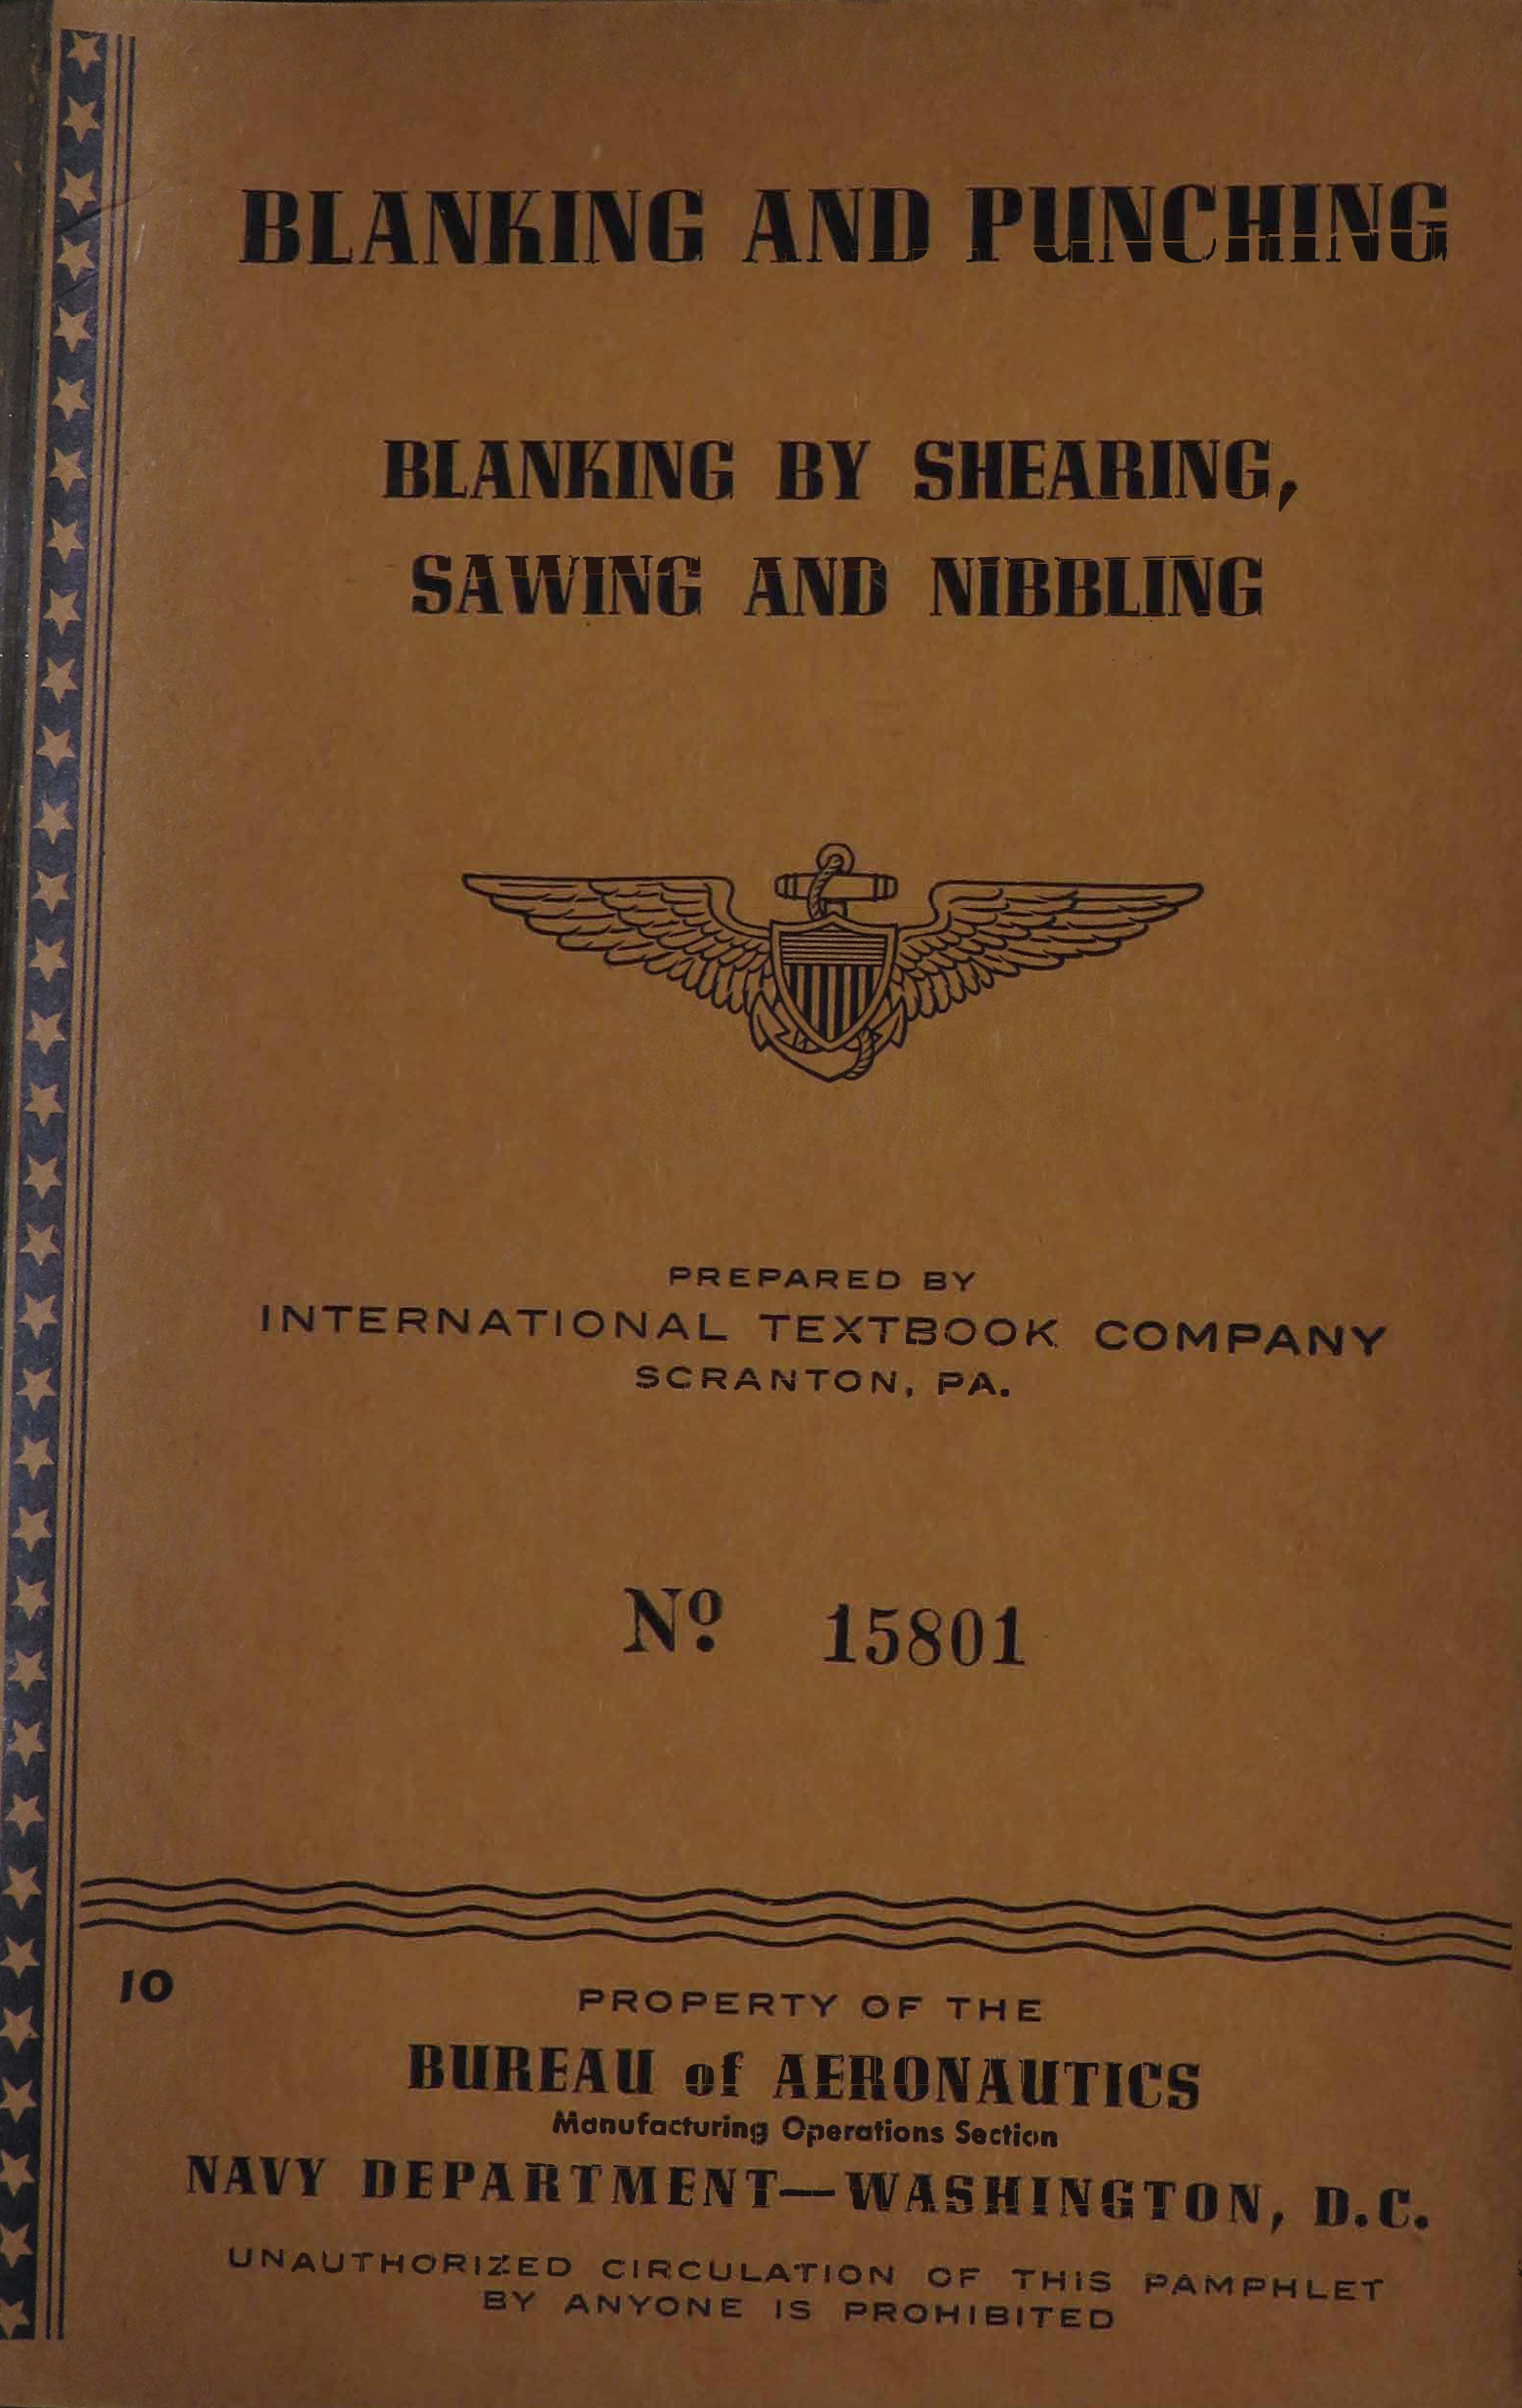 Sample page 1 from AirCorps Library document: Blanking and Punching - Blanking by Shearing, Sawing, and Nibbling - Bureau of Aeronautics